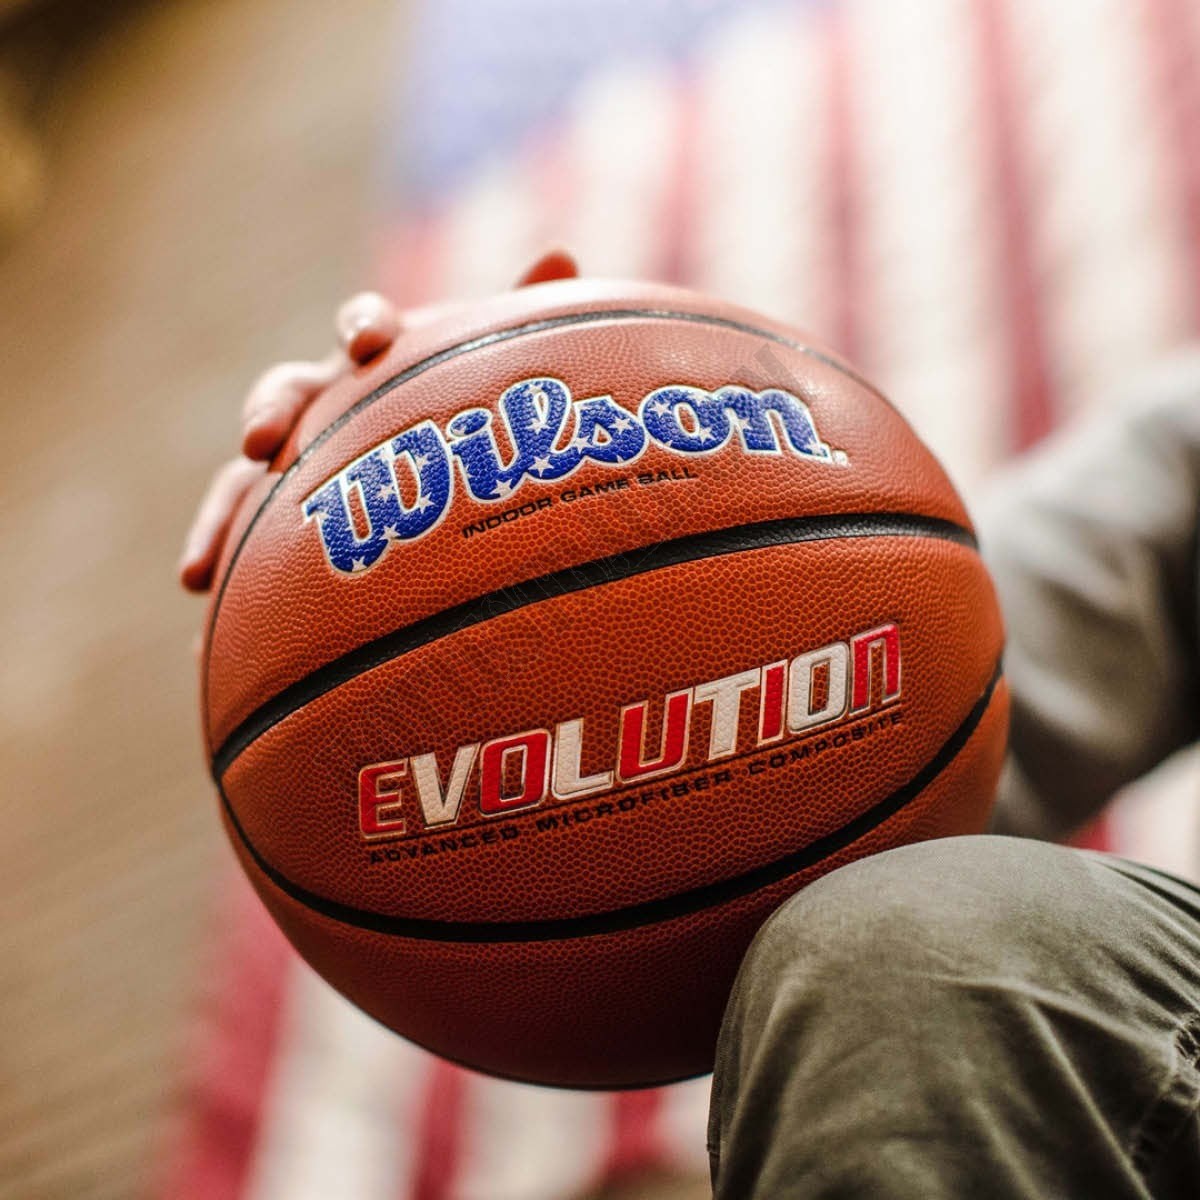 USA Special Edition Evolution Basketball - Wilson Discount Store - -2